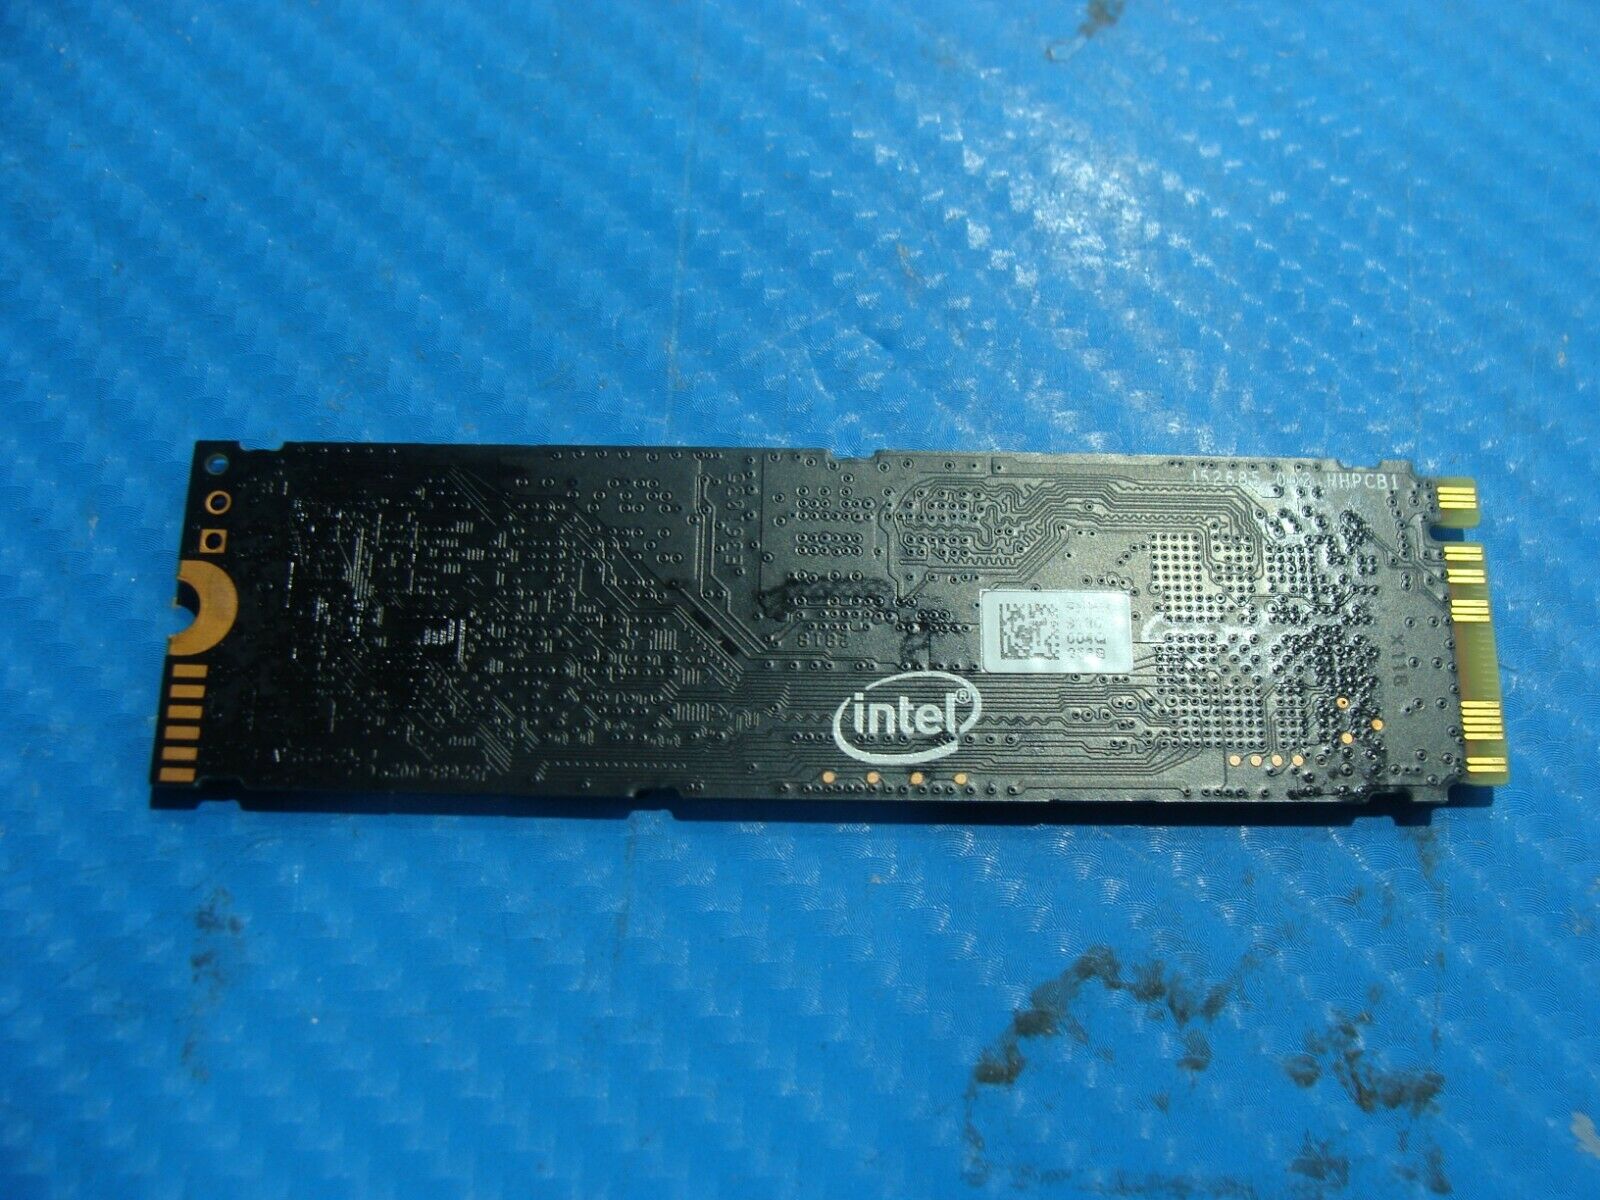 Dell XPS 13 9380 Intel 256Gb NVMe M.2 SSD Solid State Drive ssdpekkf256g8 tchpy 